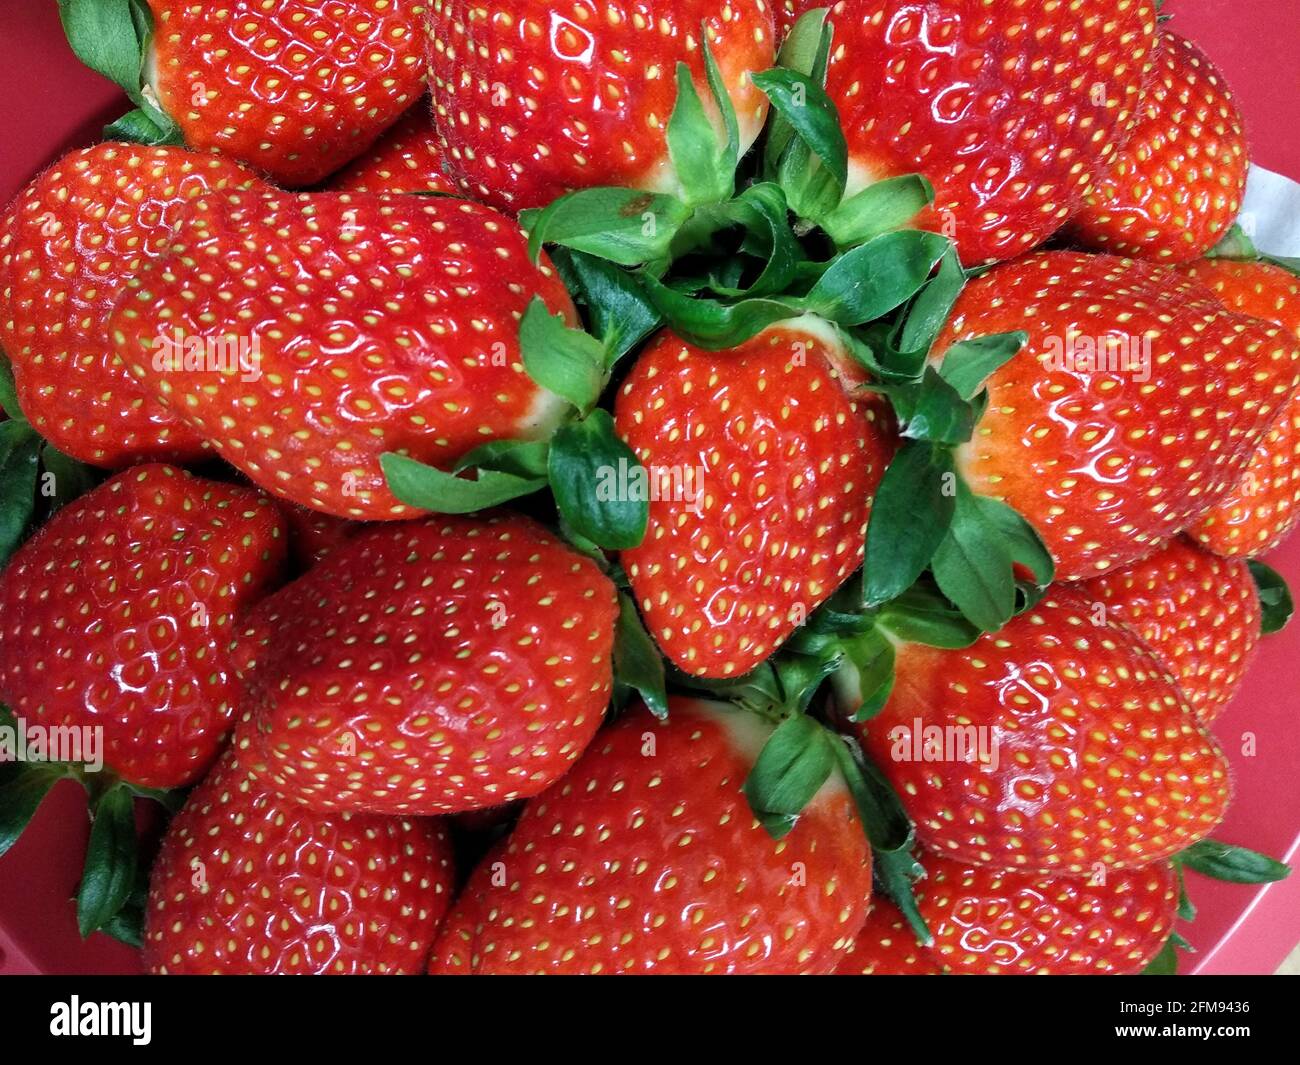 Red strawberries in the market Stock Photo